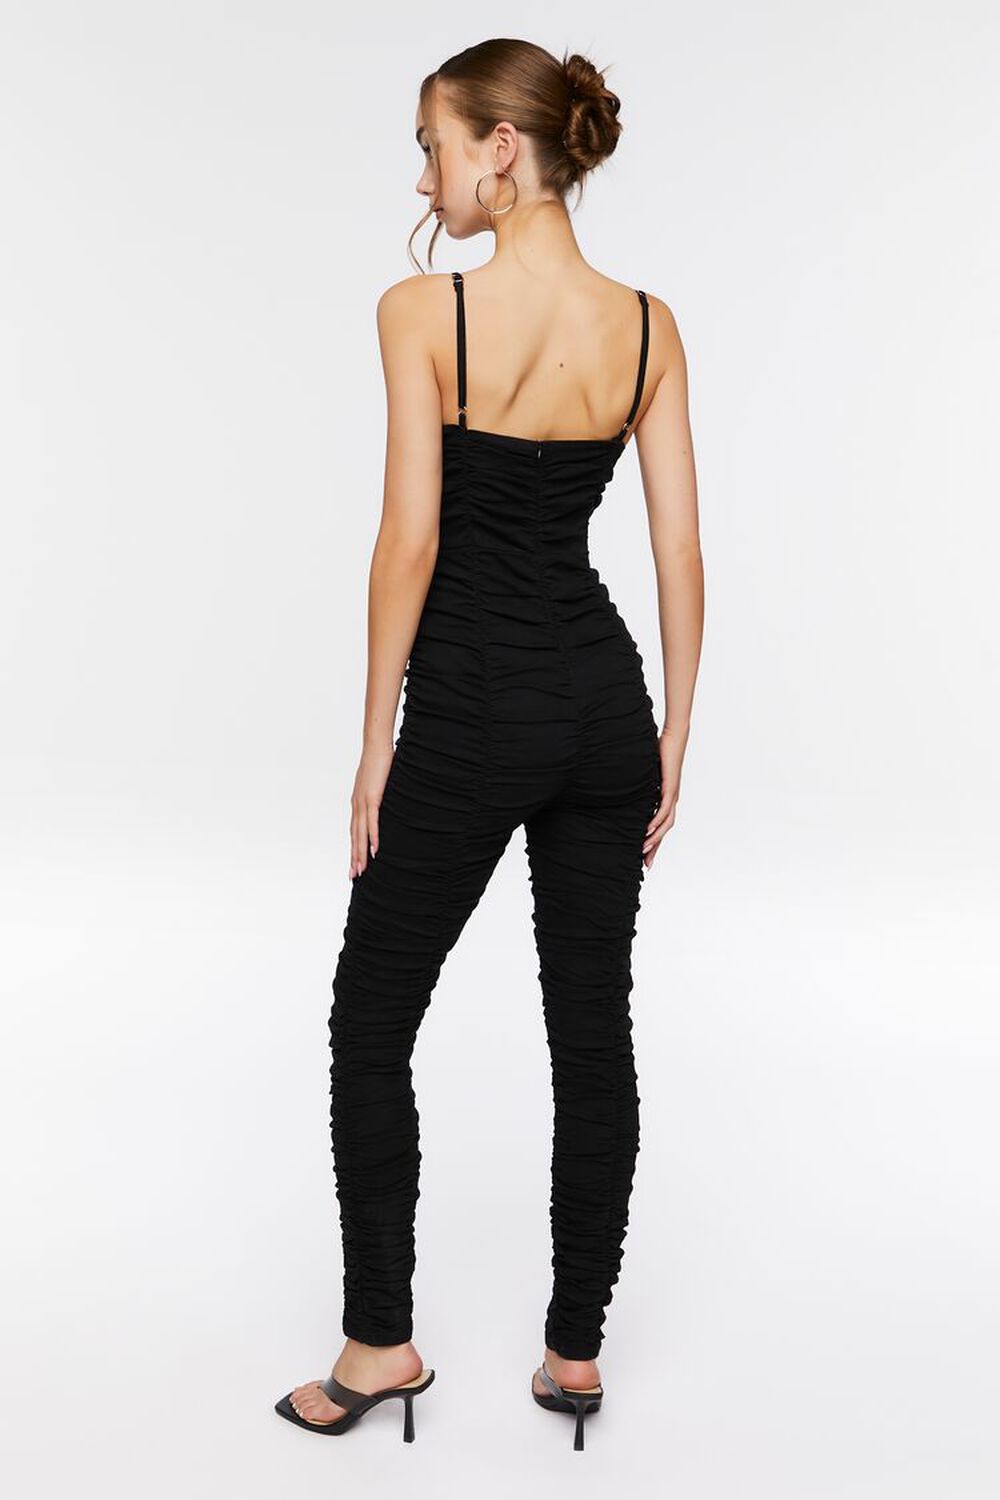 WASHED BLACK Ruched Sweetheart Jumpsuit, image 3